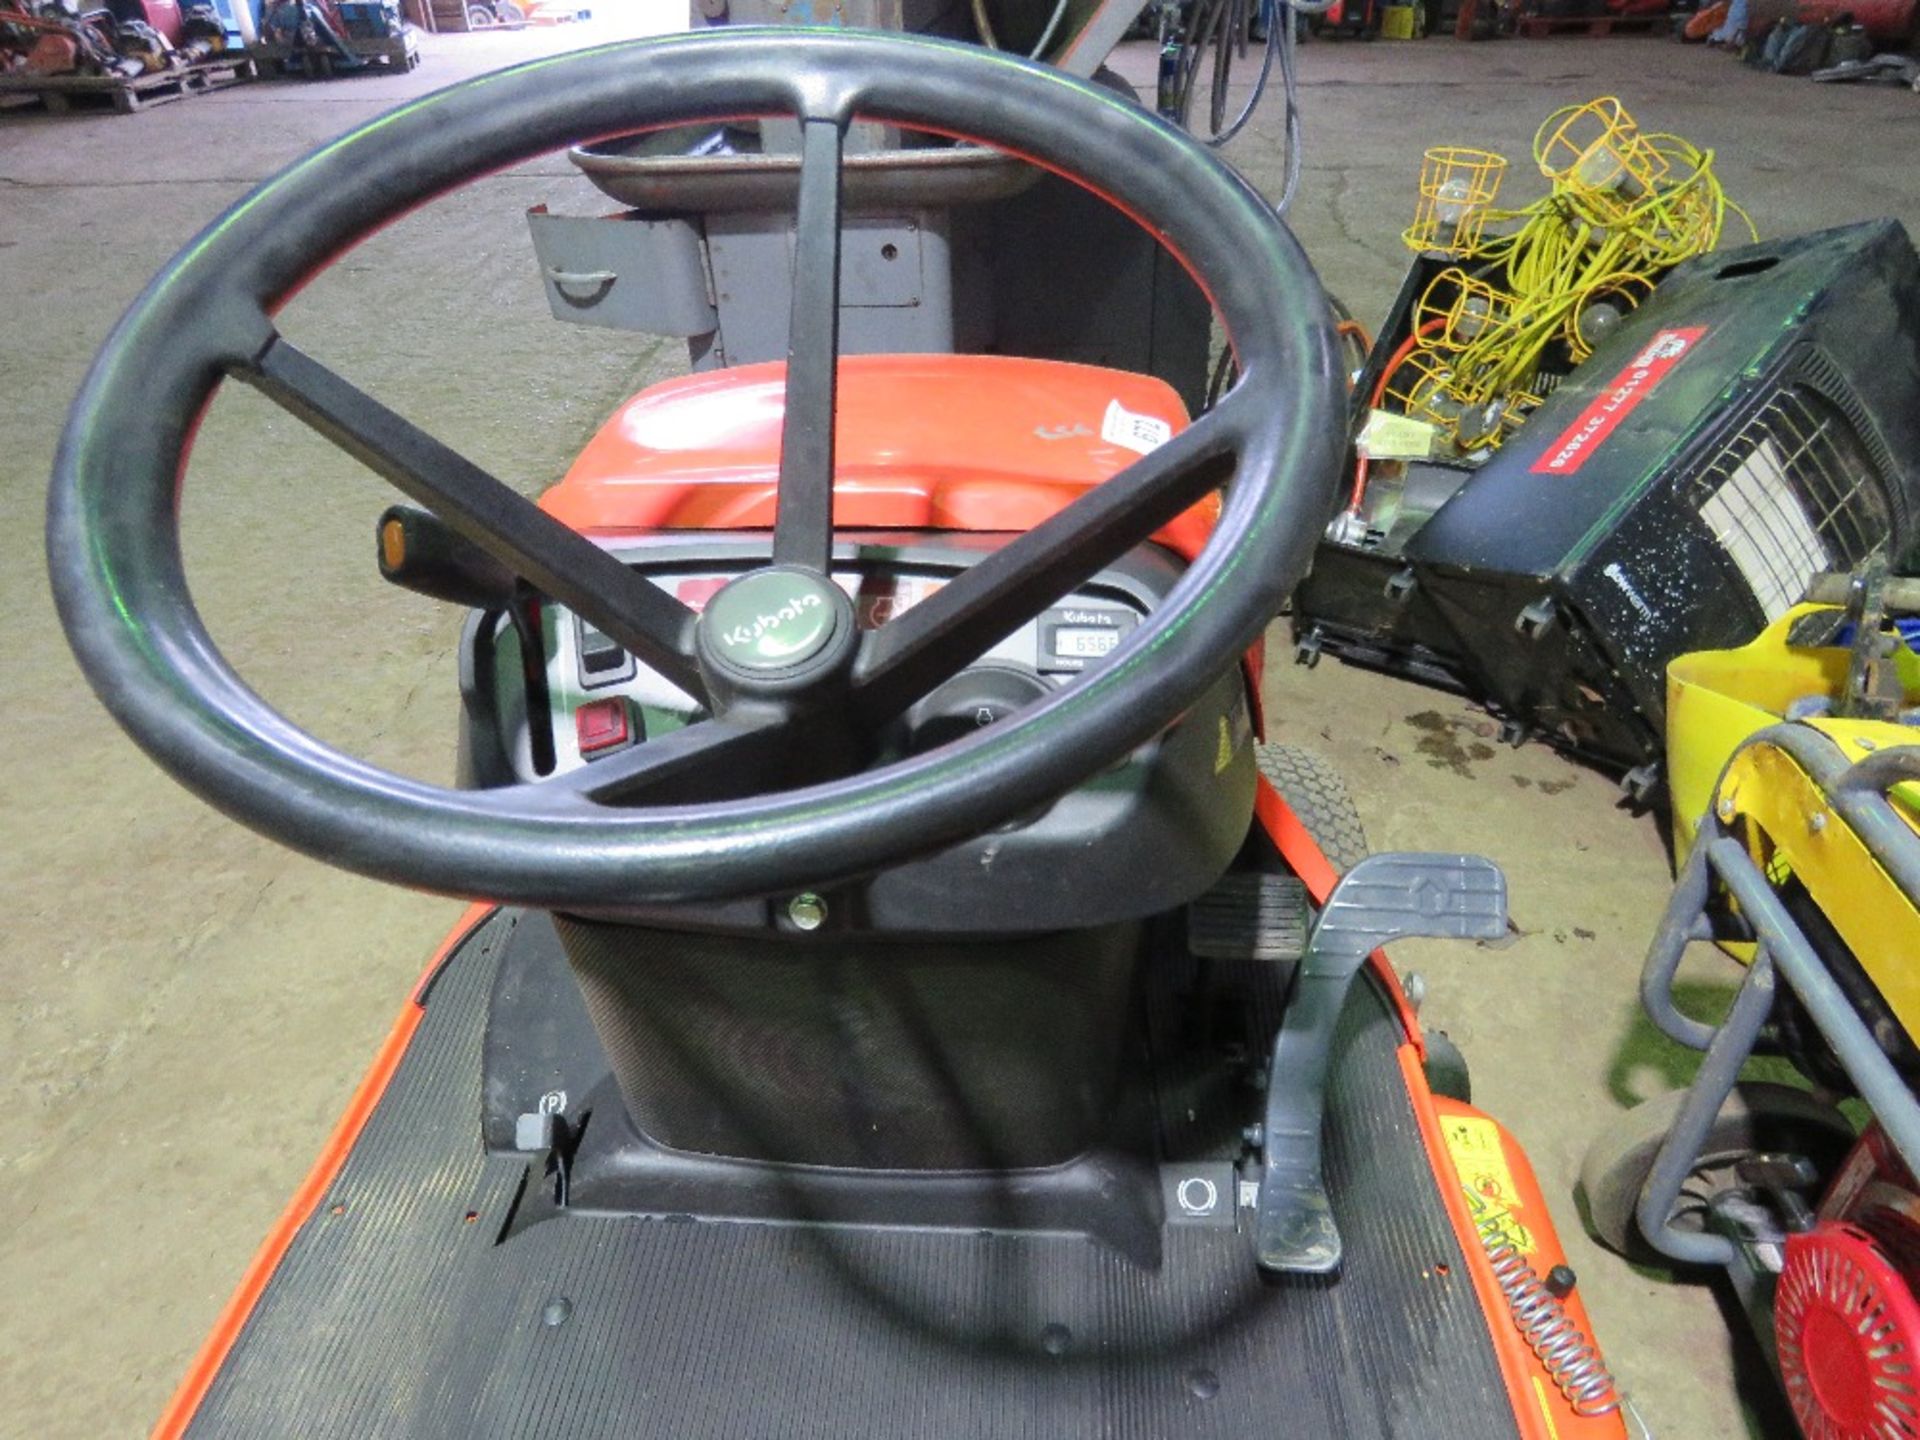 KUBOTA GR1600-II DIESEL RIDE ON MOWER WITH REAR COLLECTOR PLUS DISCHARGE CHUTE. SN:30142. WHEN TESTE - Image 9 of 14